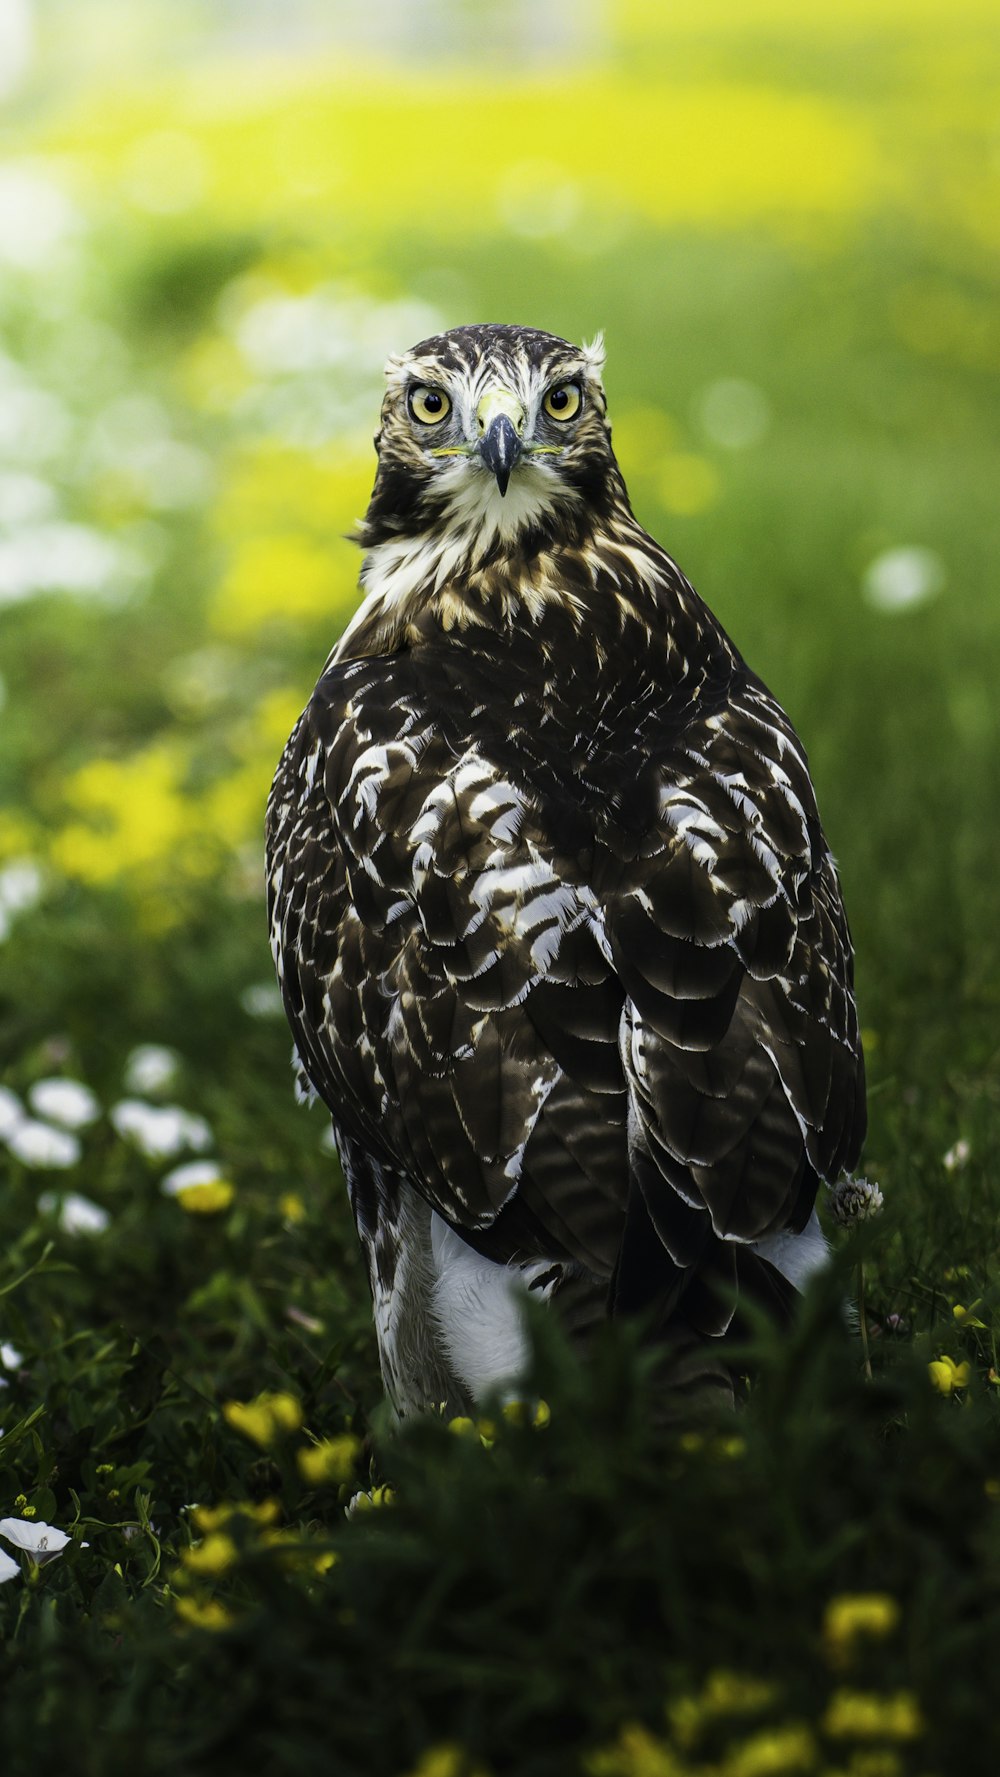 brown and white eagle on green grass during daytime